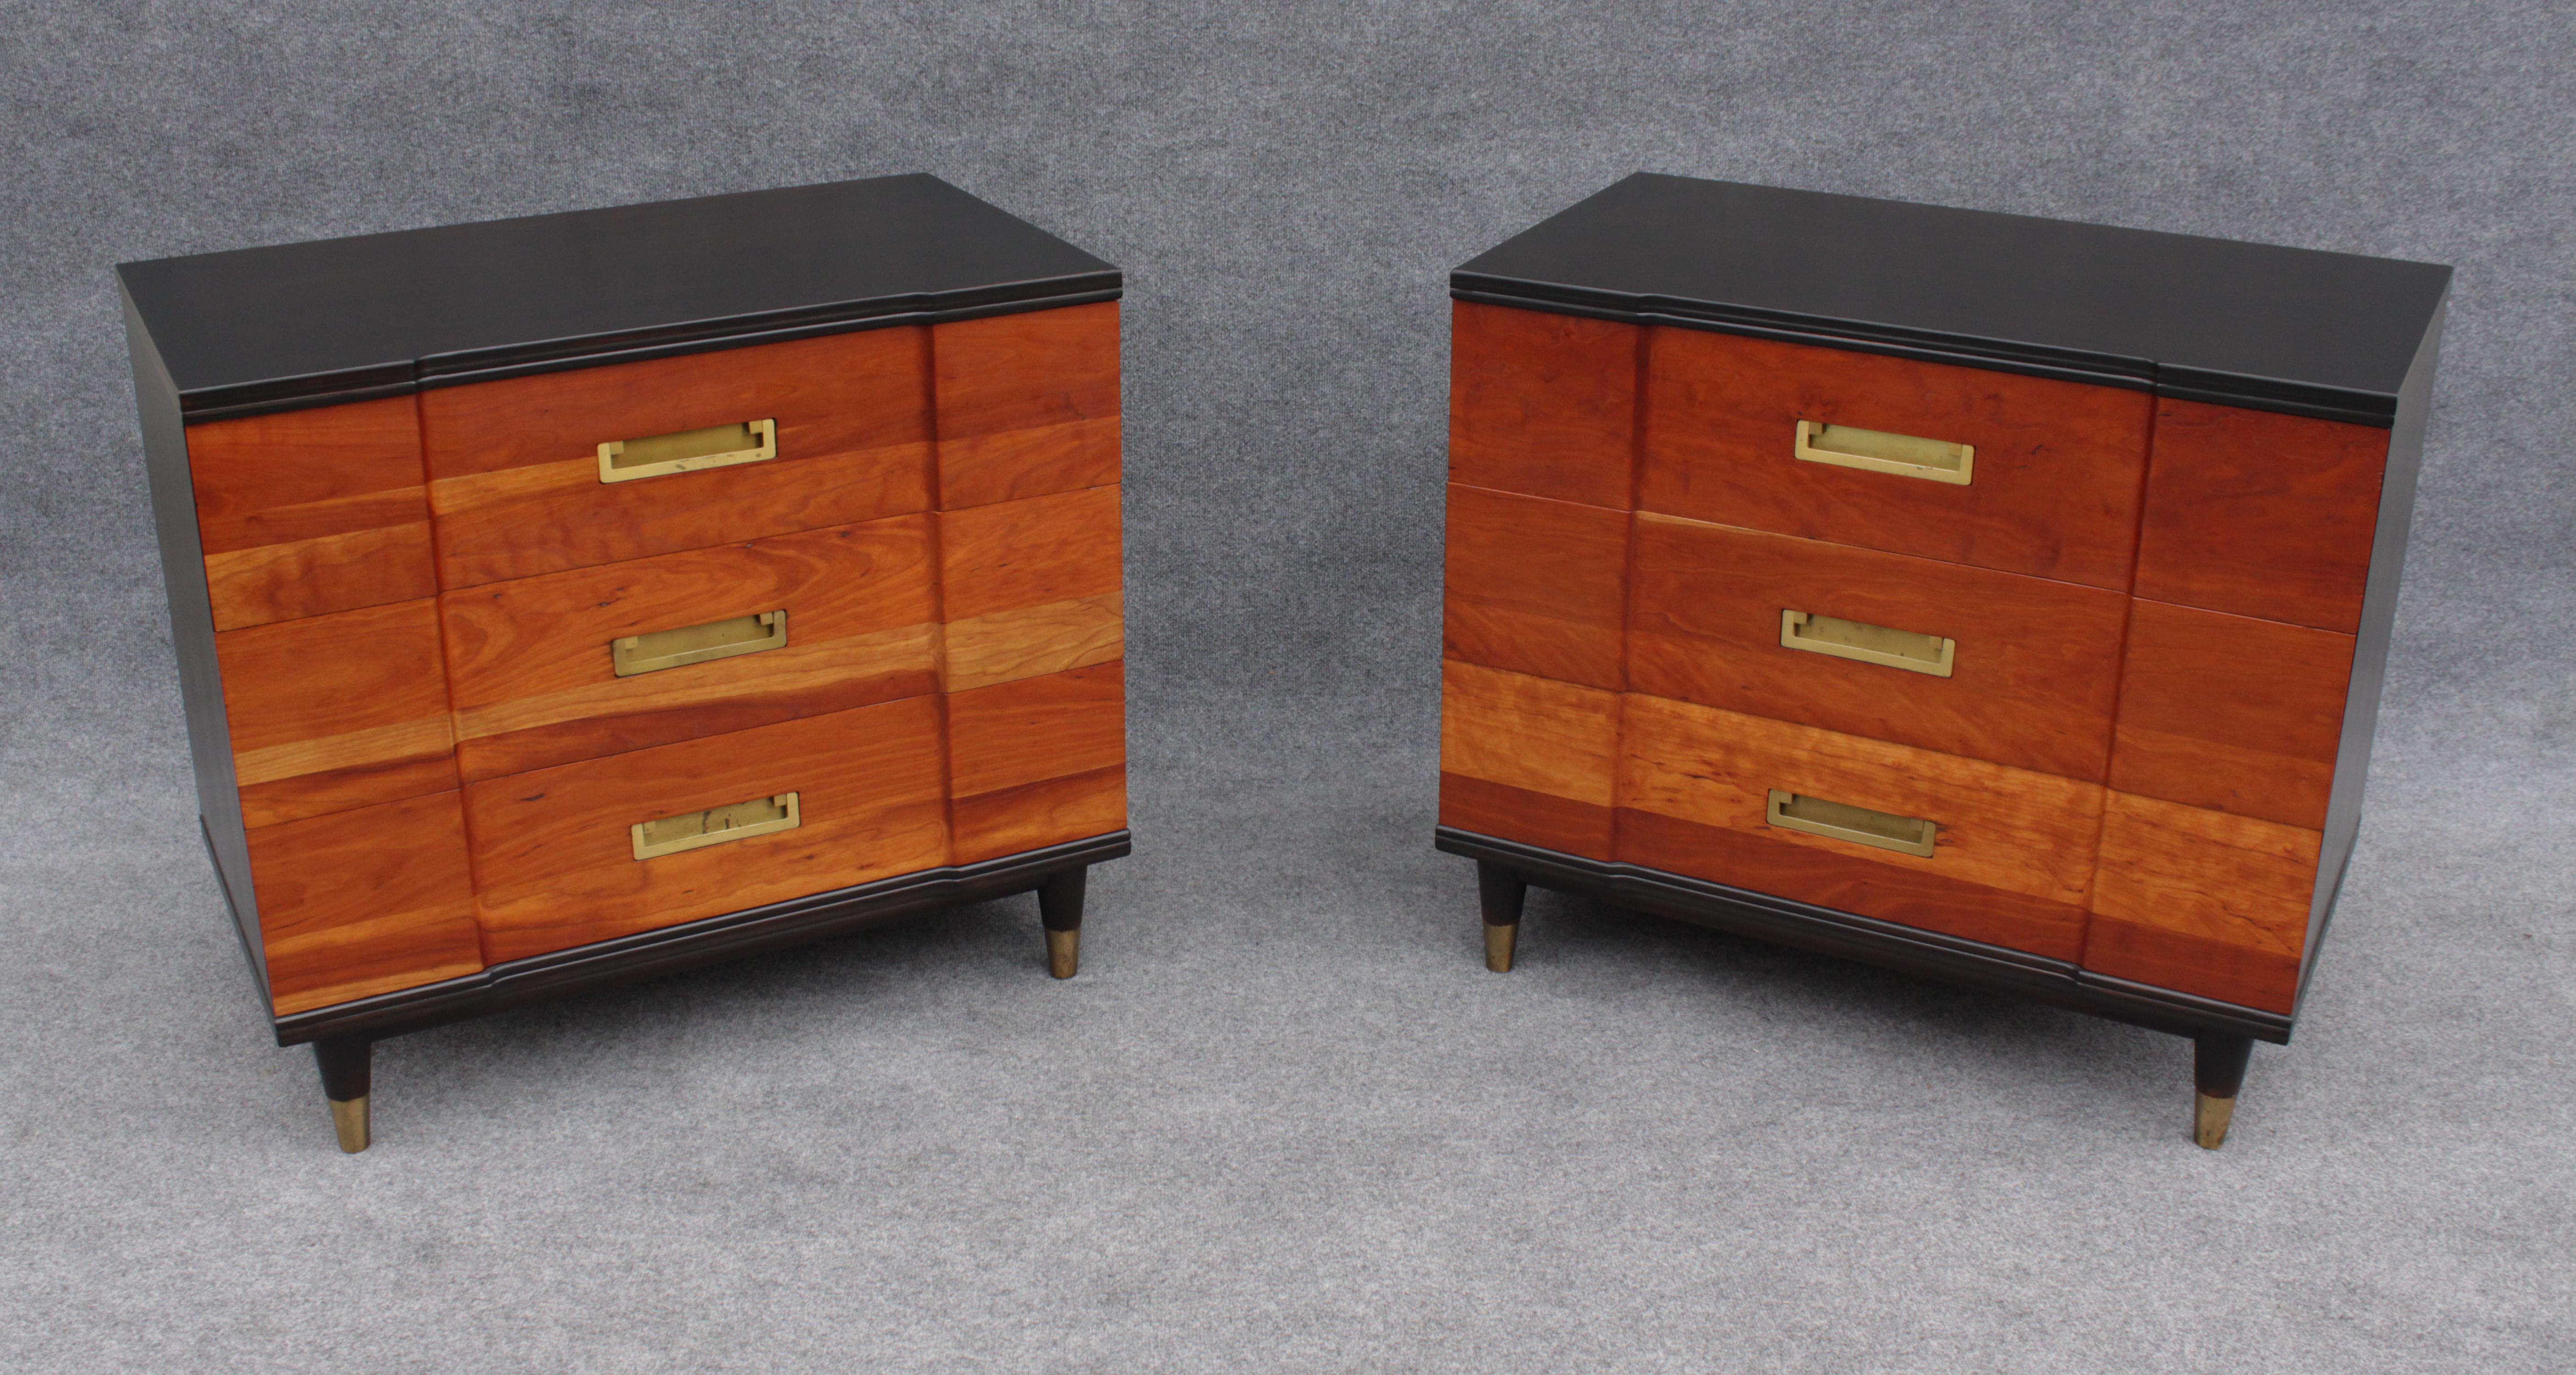 Designed by John Clingman, this line of furniture was produced by John Widdicomb. Made with solid walnut panels throughout, these dressers have been refinished. The tops, sides, backs, and other accents have been stained a very dark brown, while the